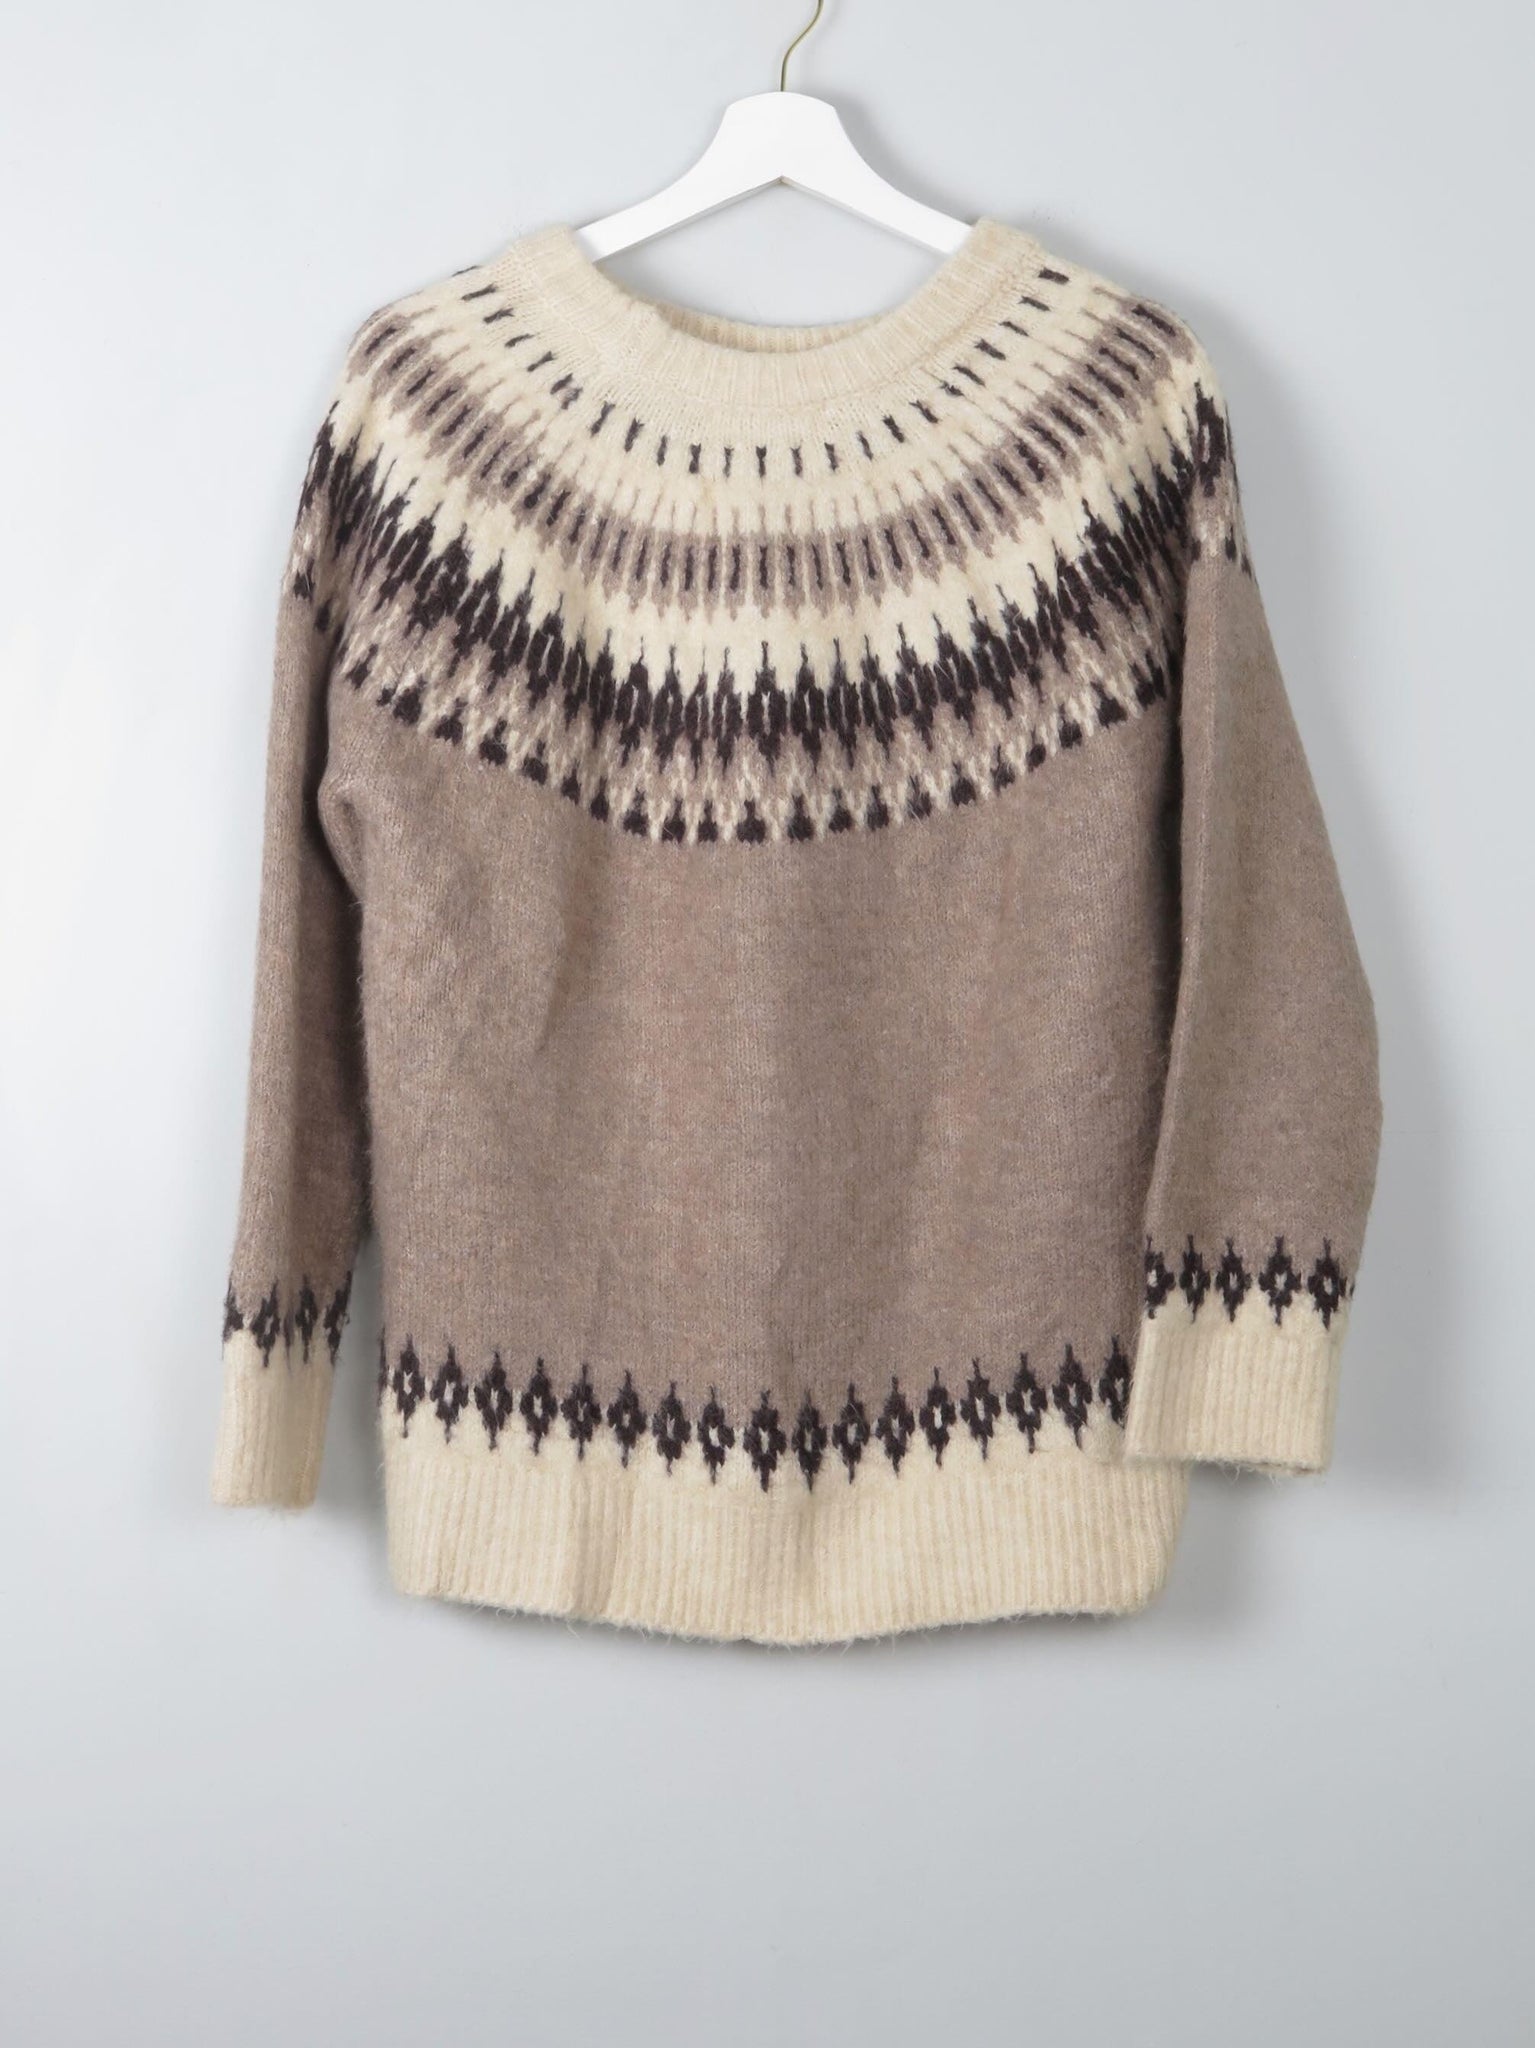 Women's Nordic Style Jumper S/M - The Harlequin